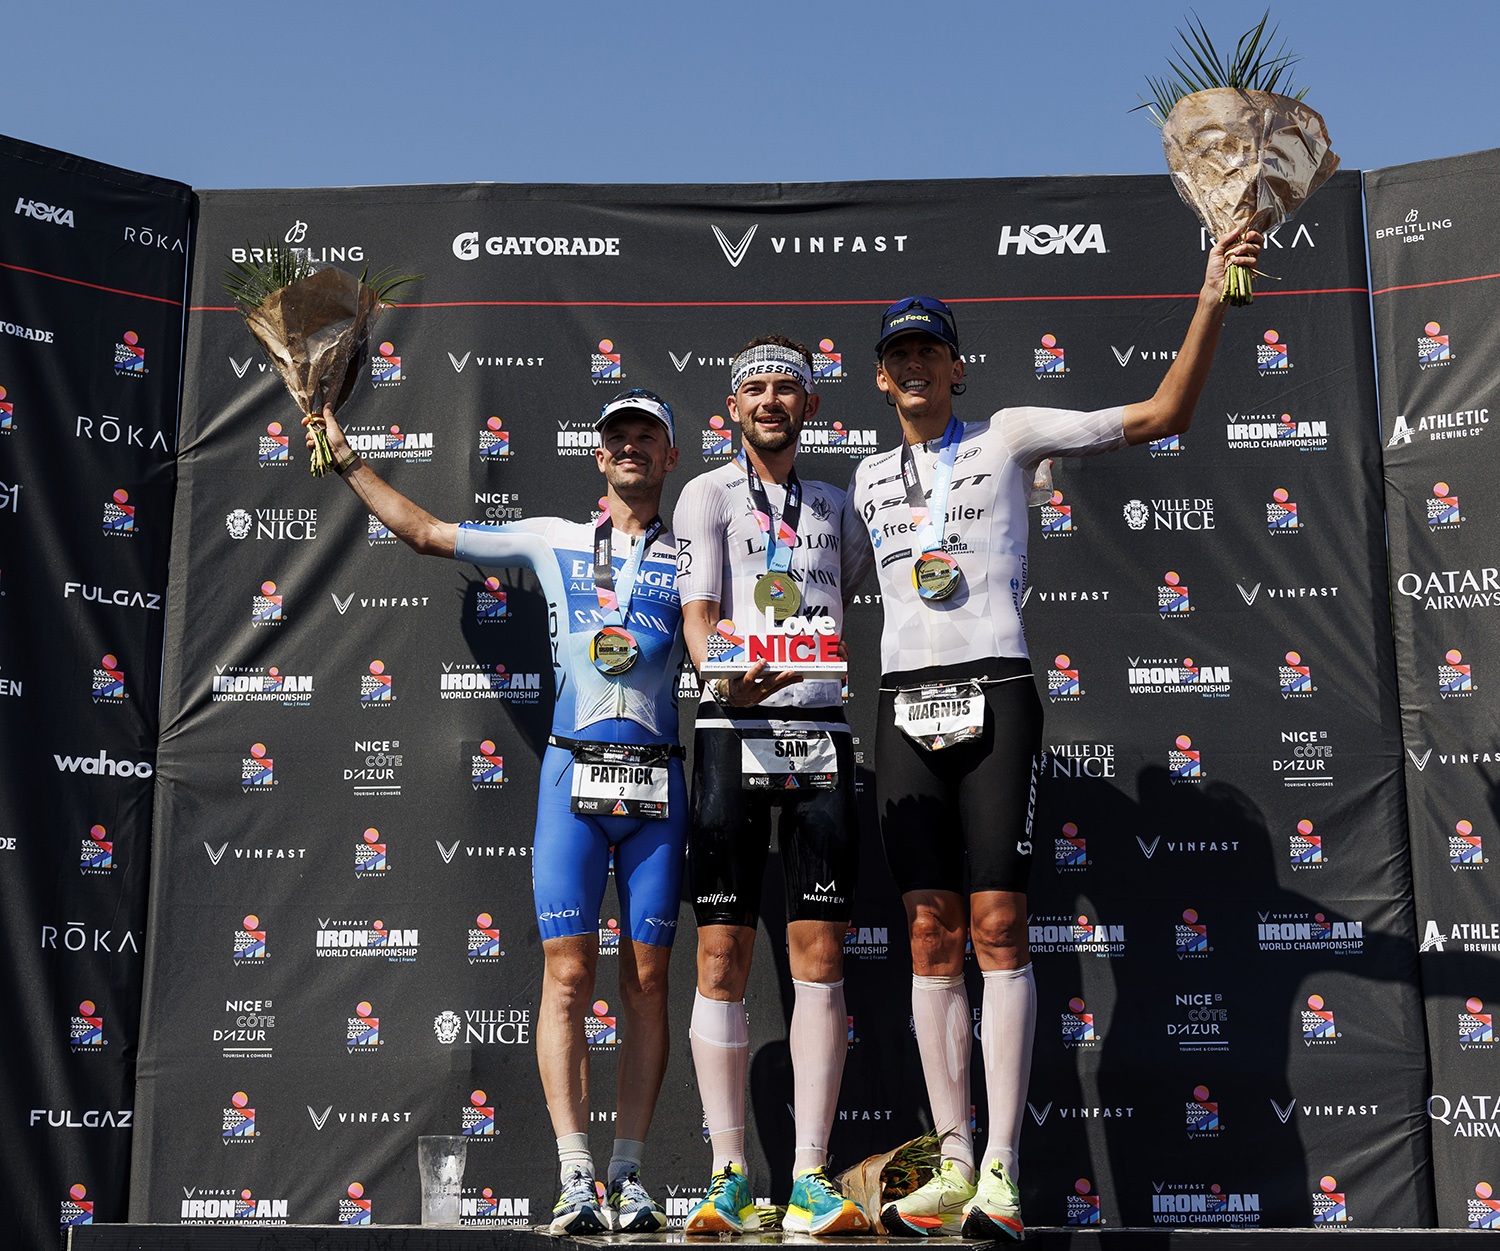 From left to right: Patrick Lange (2nd), Sam Laidlow (1st) and Magnus Ditlev (3rd) on the Ironman World Championships podium. Photography: Jan Hetfleisch / Getty Images / Ironman